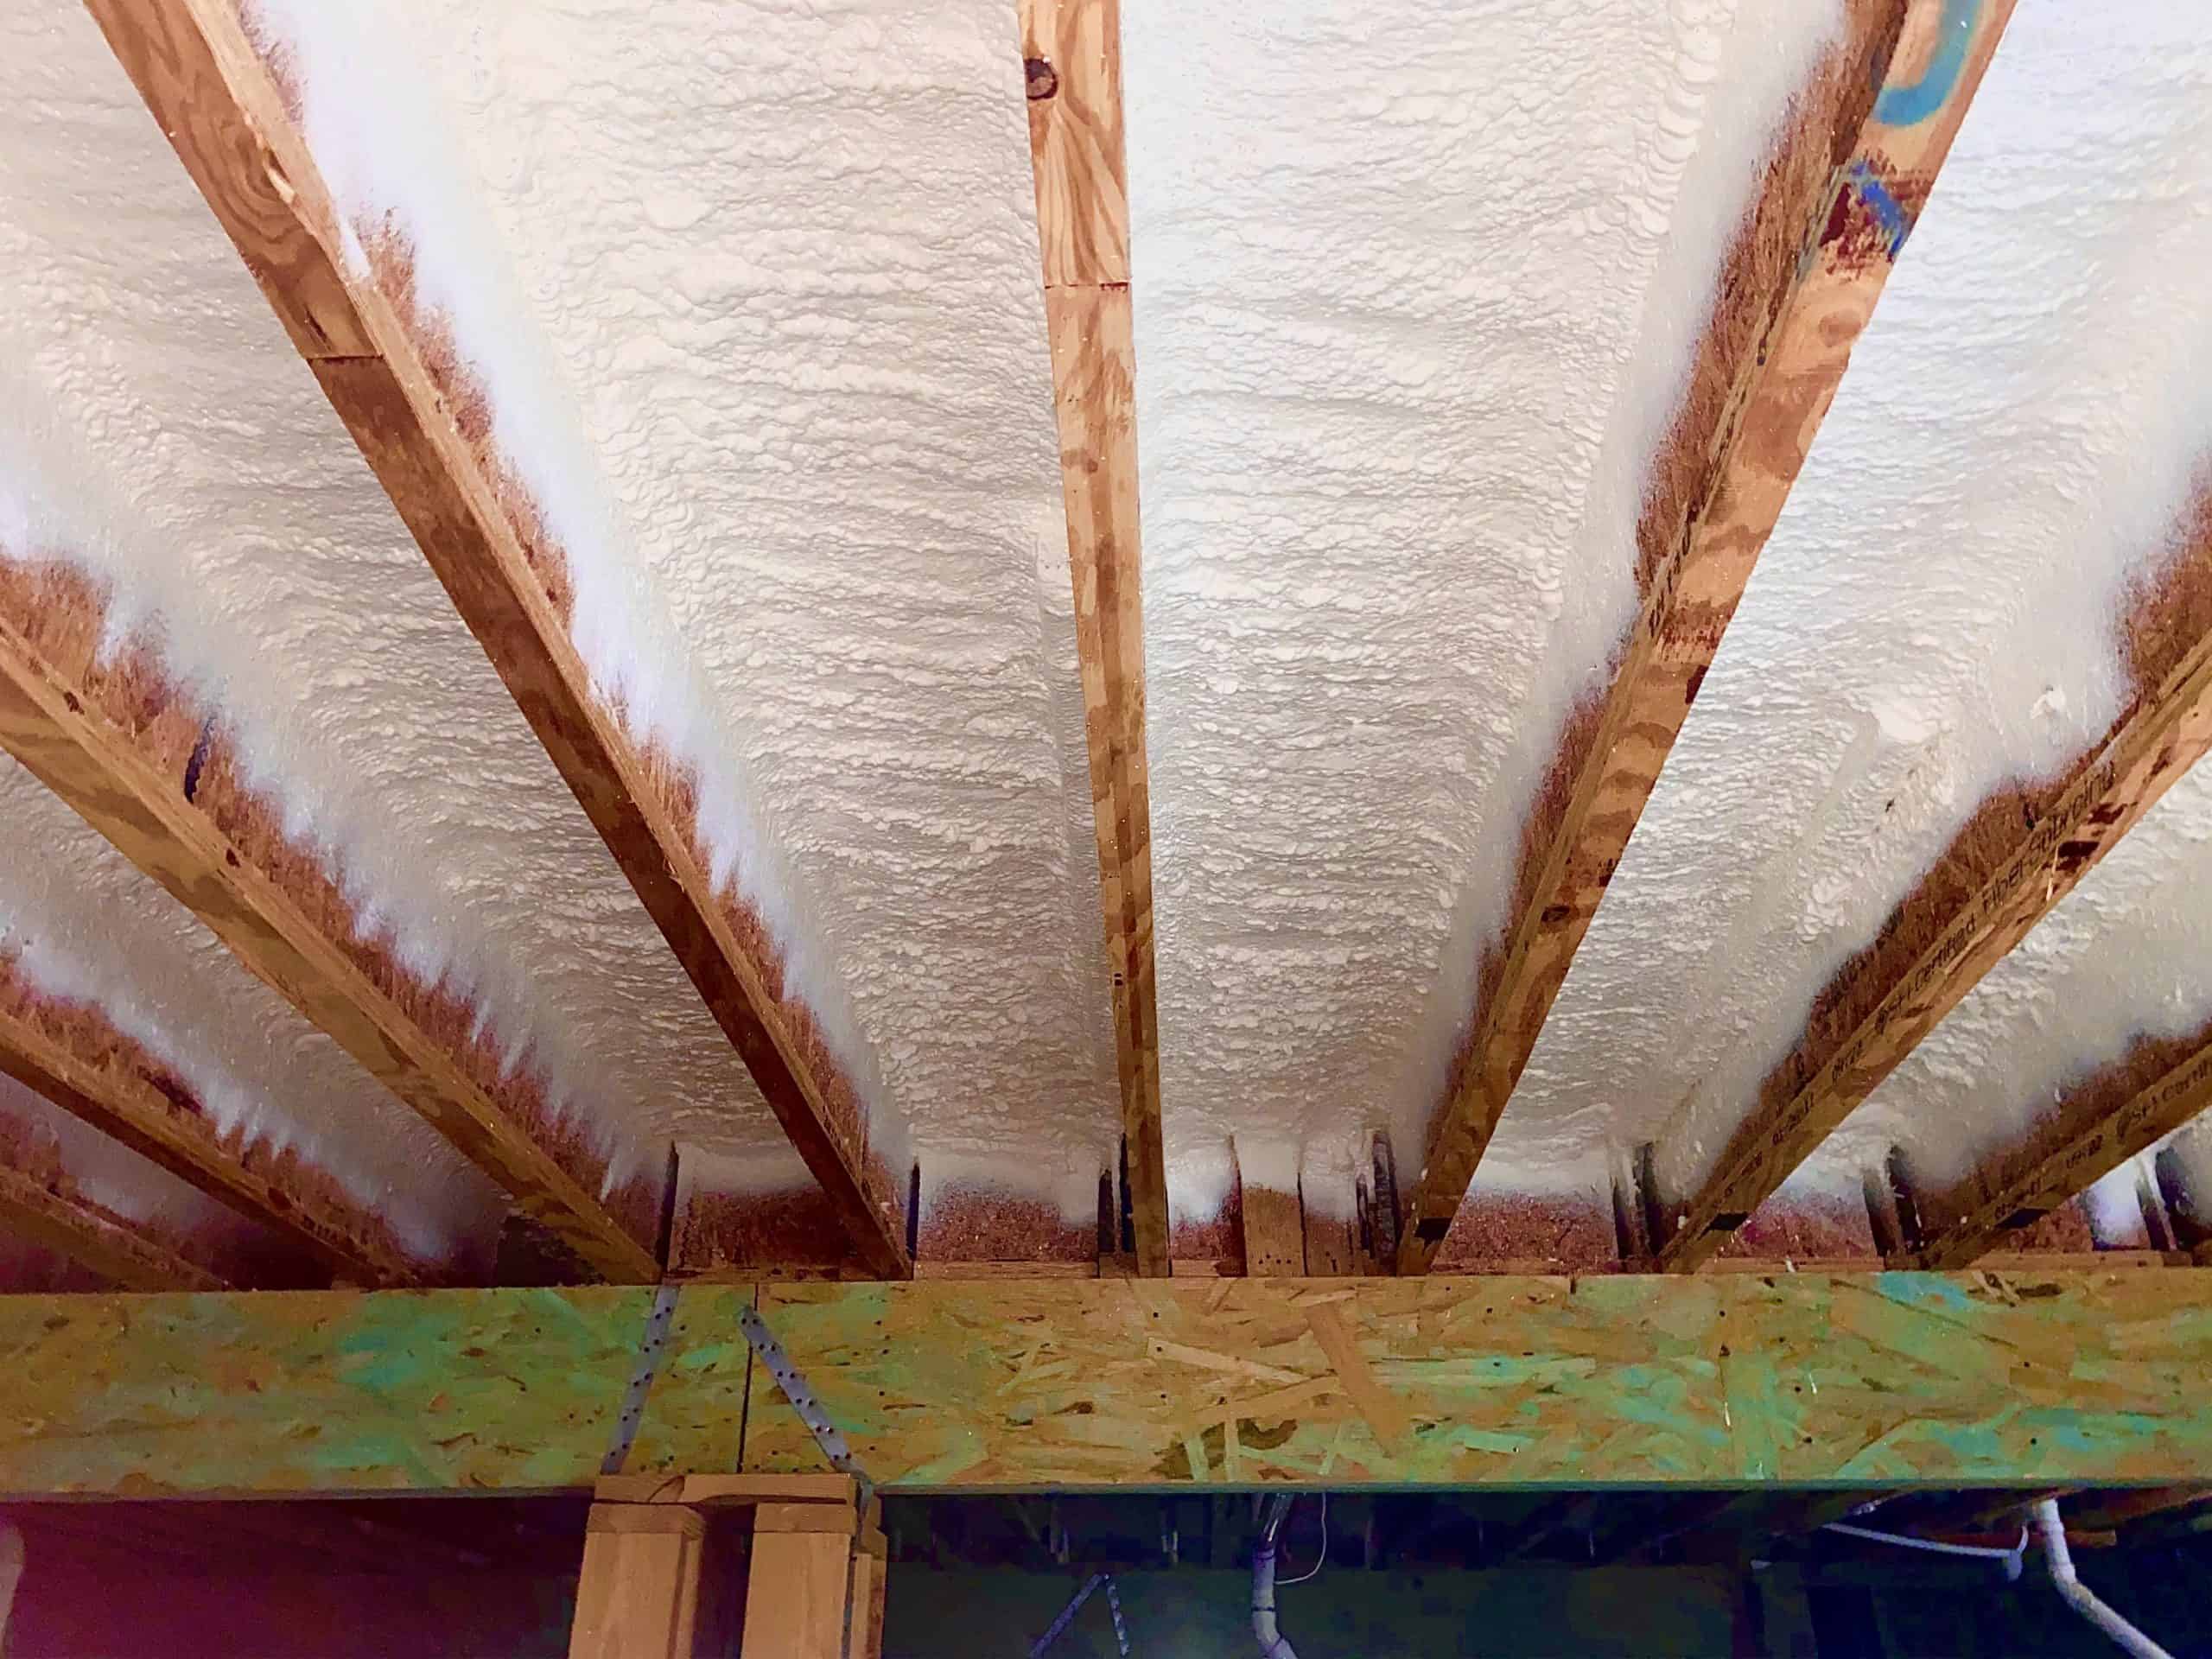 How Much Does Spray Foam Insulation Cost? (2024)